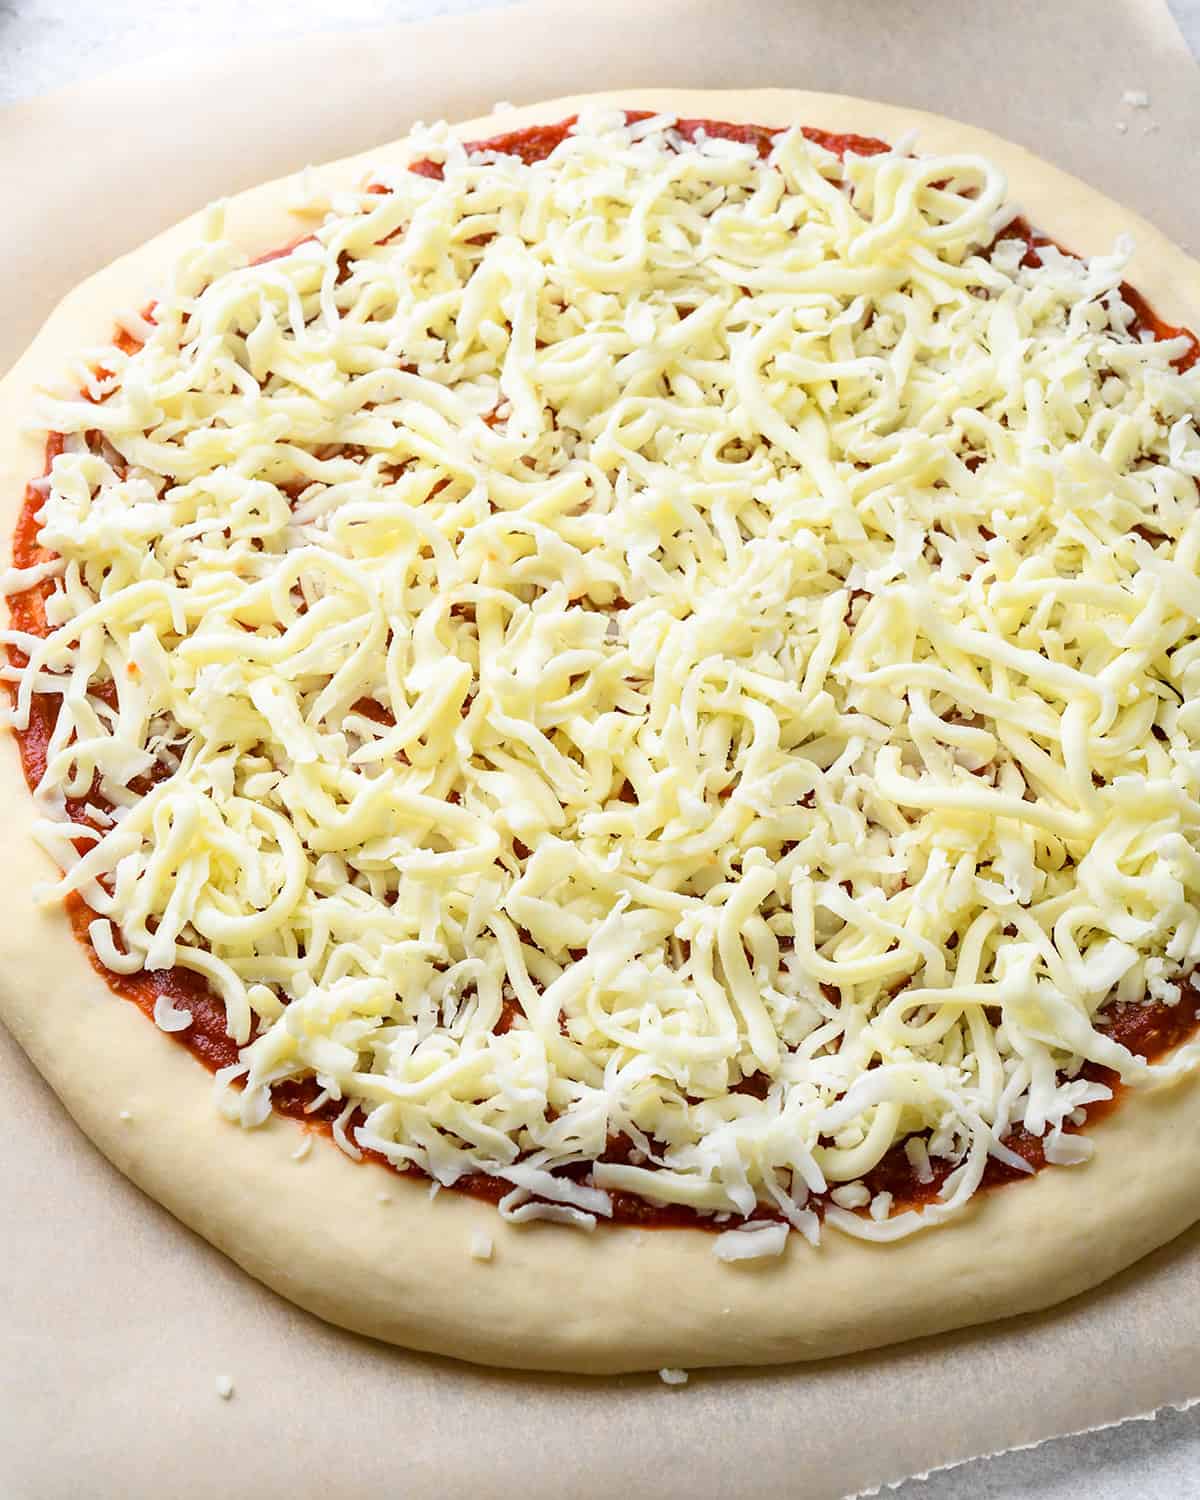 How to Make Pizza cheese on the sauce 